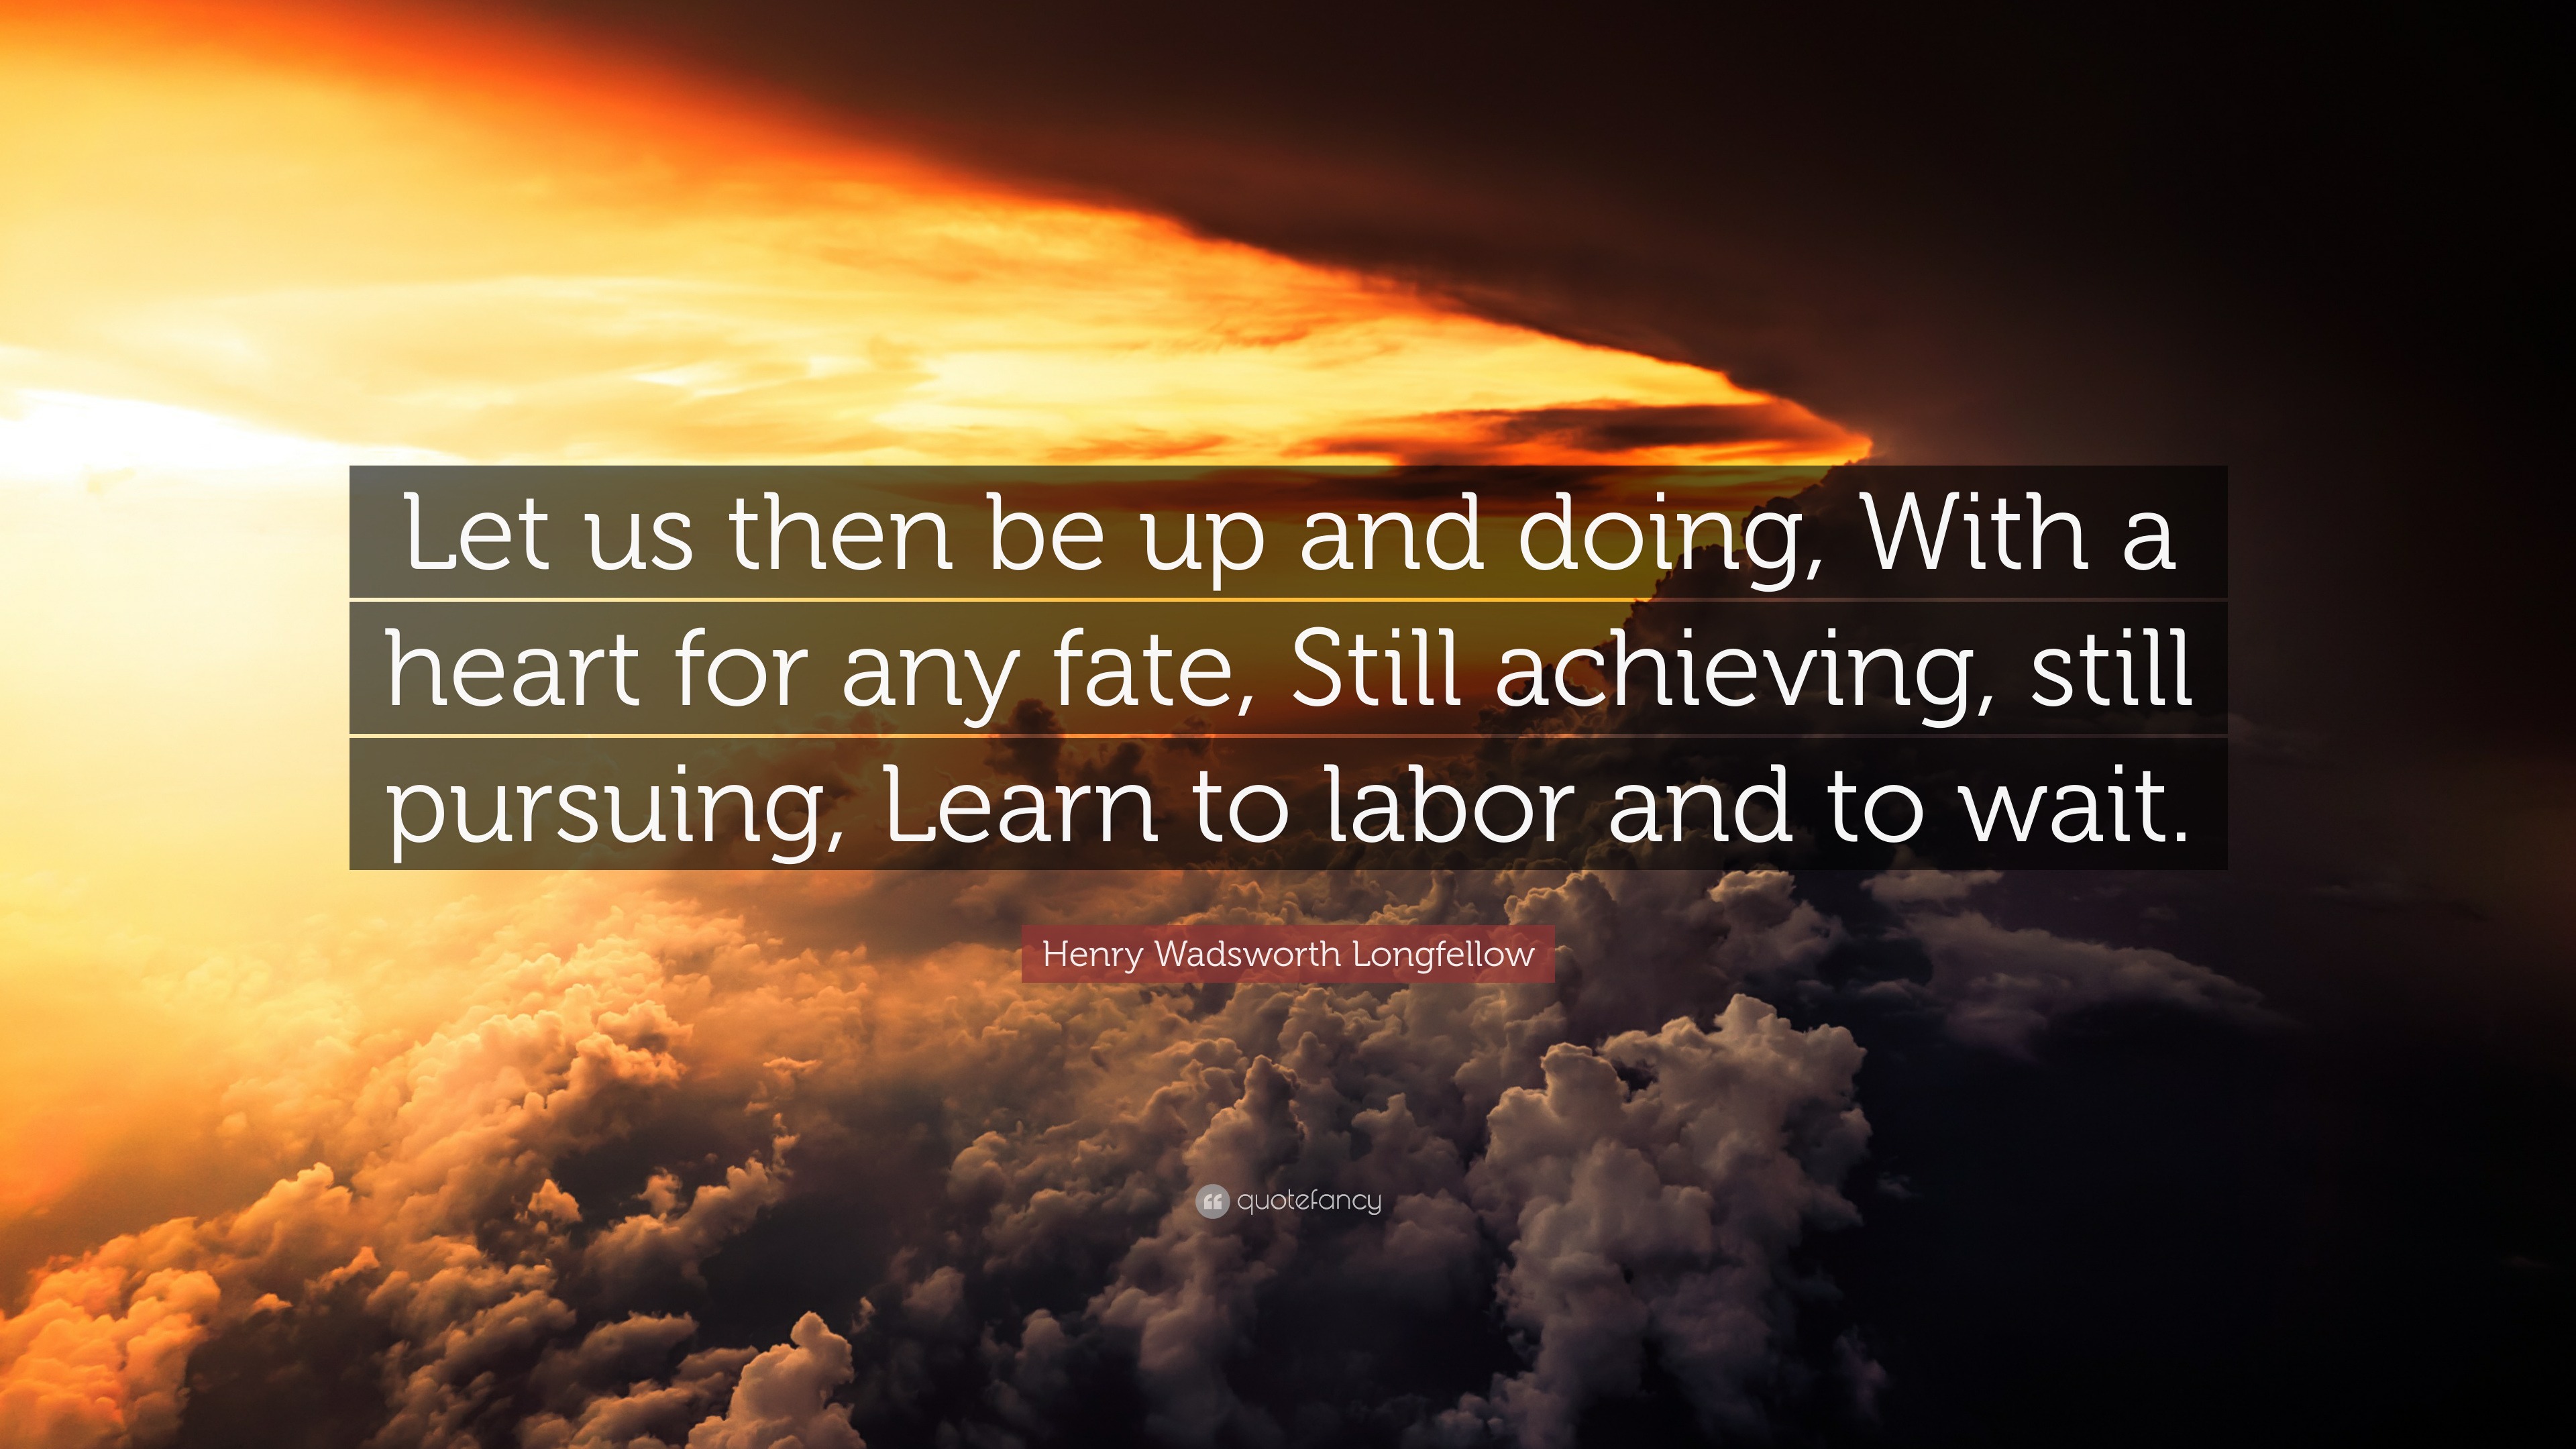 Henry Wadsworth Longfellow Quote: “Let us then be up and doing, With a